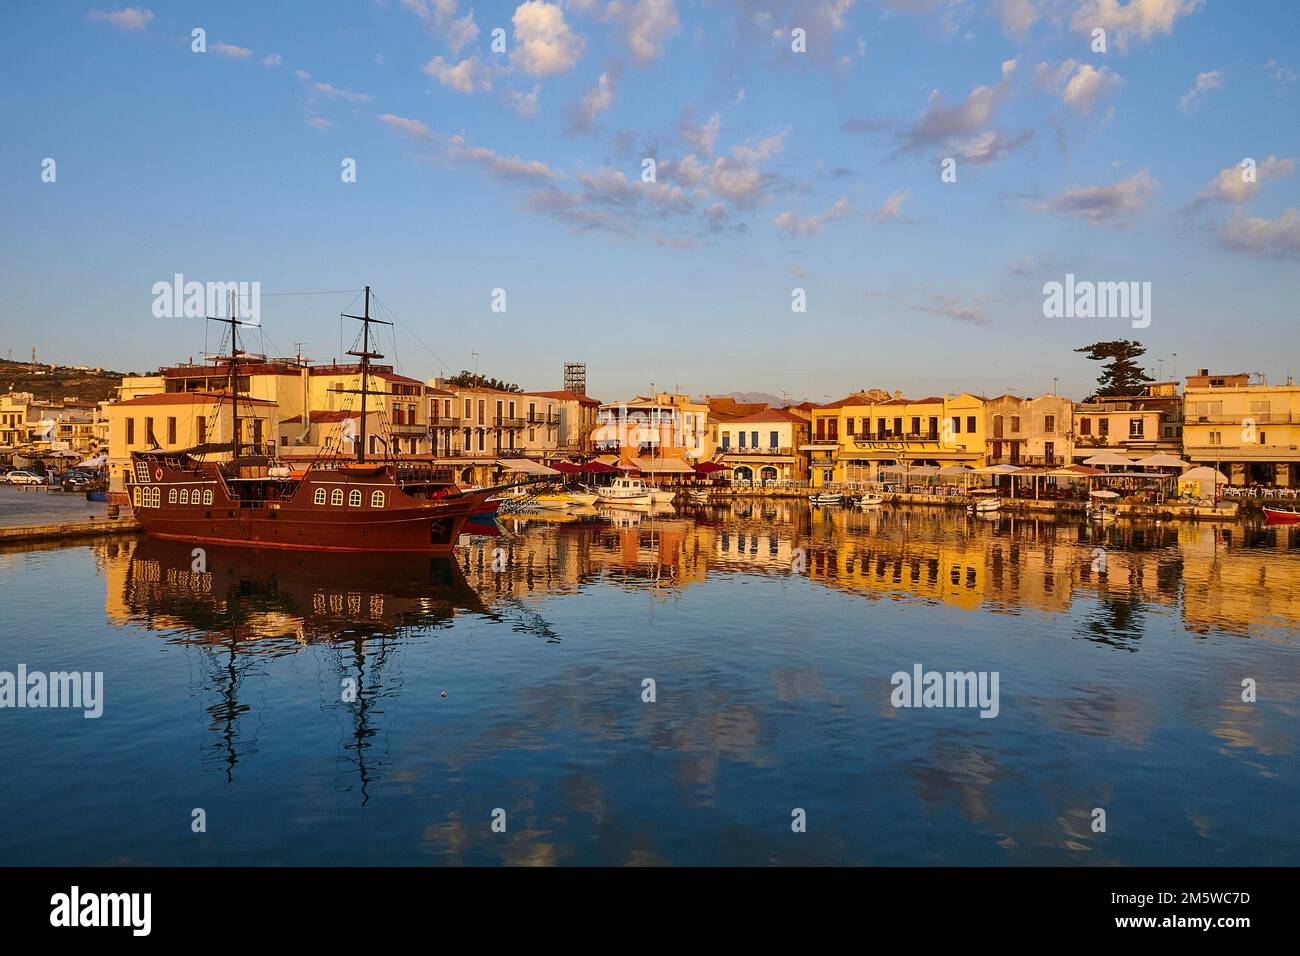 Morning light, sunrise, Venetian harbour, pirate ship, row of houses, colourful houses, reflections in the water, blue sky, few grey-white clouds Stock Photo